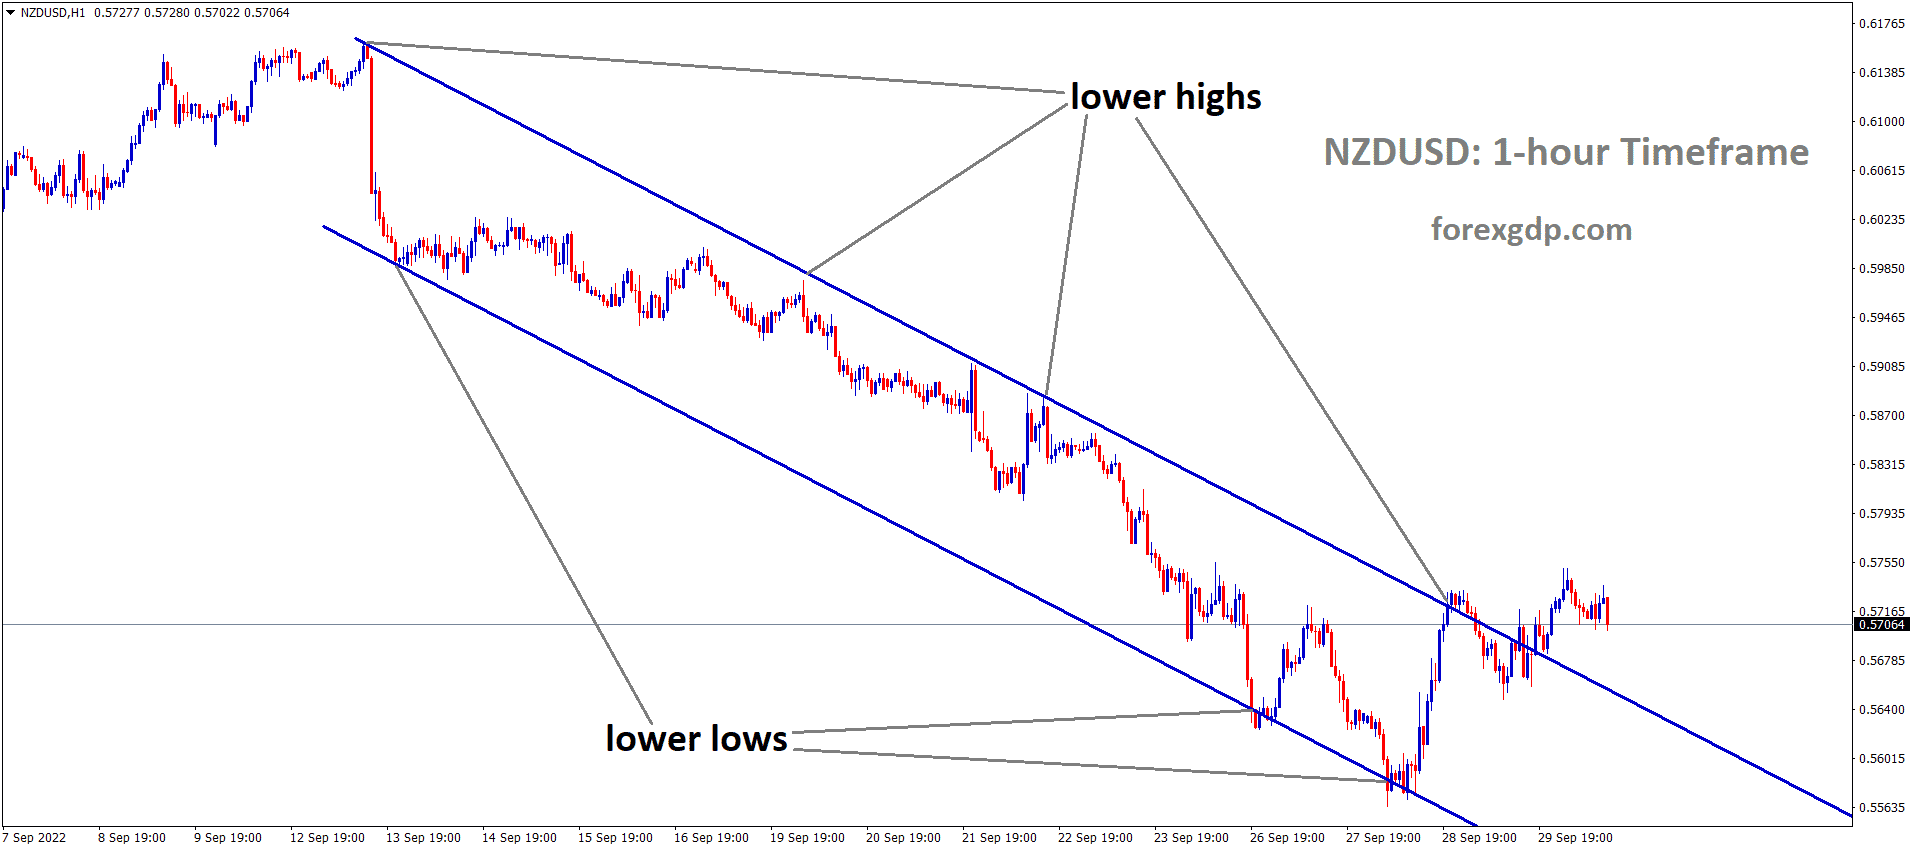 NZDUSD is moving in the Descending channel and the market has reached the lower high area of the channel 2